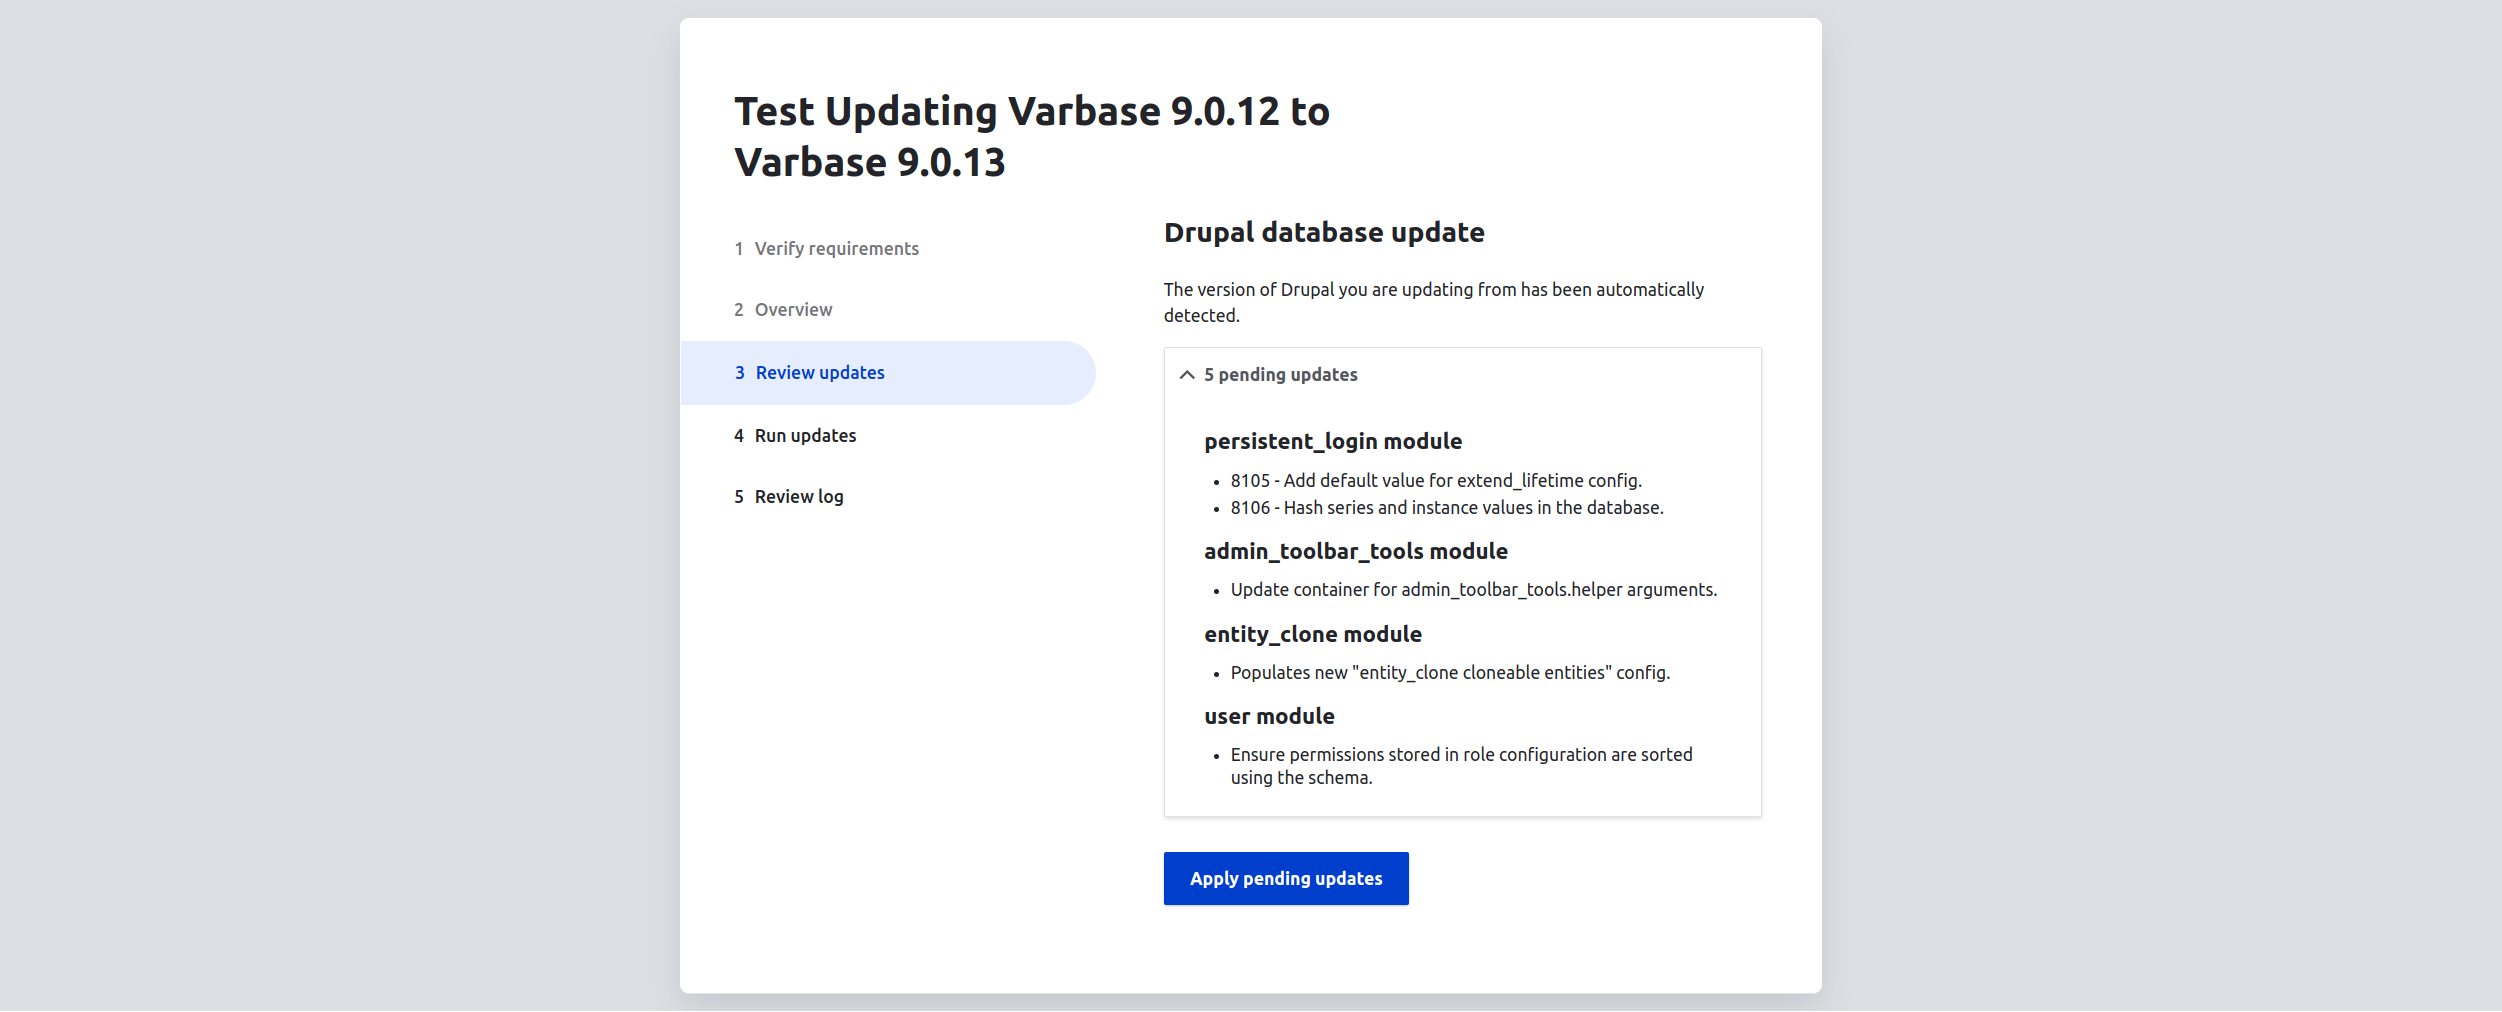 View for test updating Varbase 9.0.12 to Varbase 9.0.13